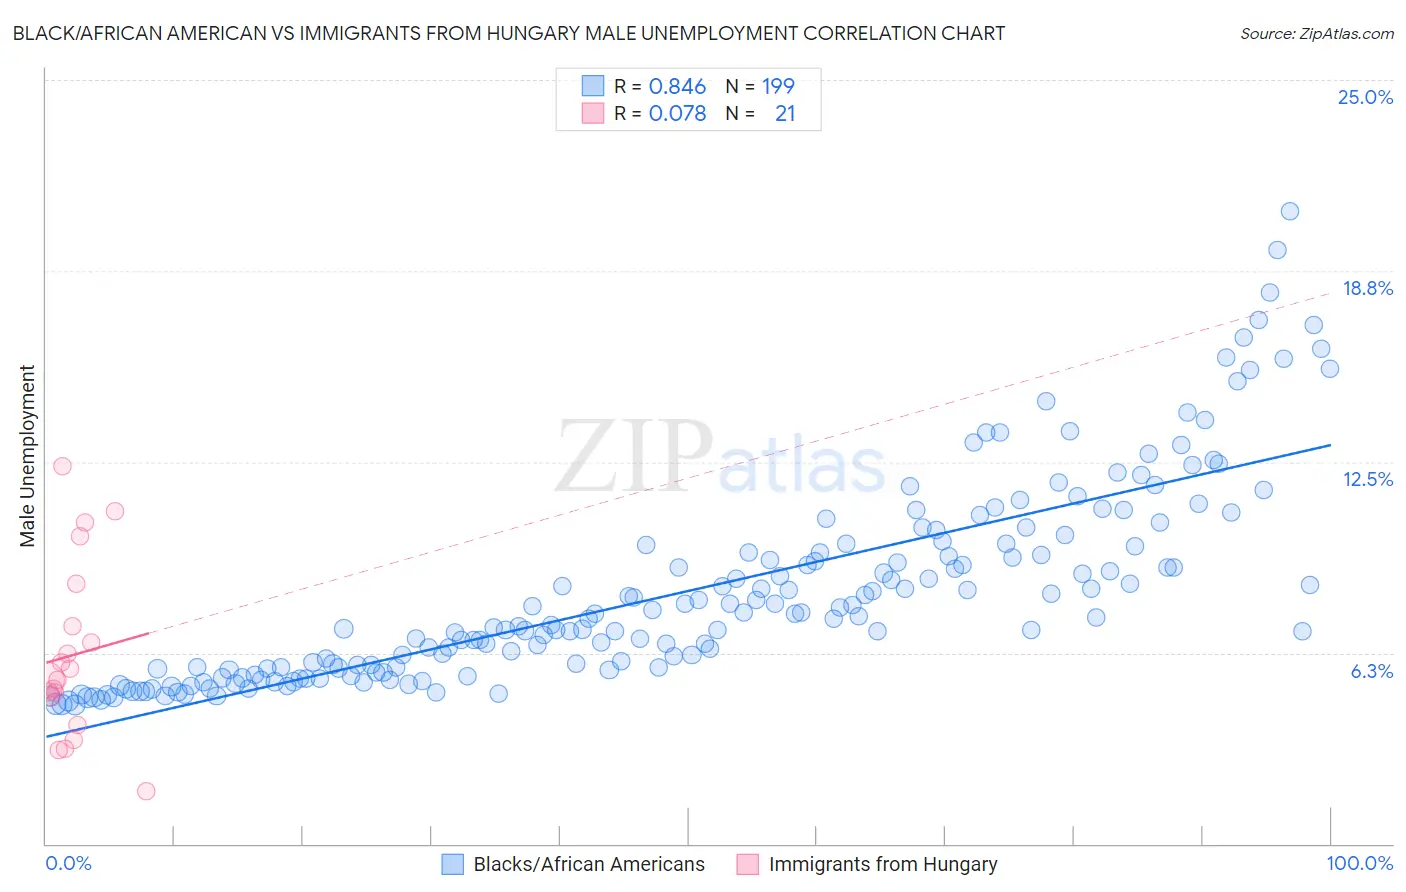 Black/African American vs Immigrants from Hungary Male Unemployment